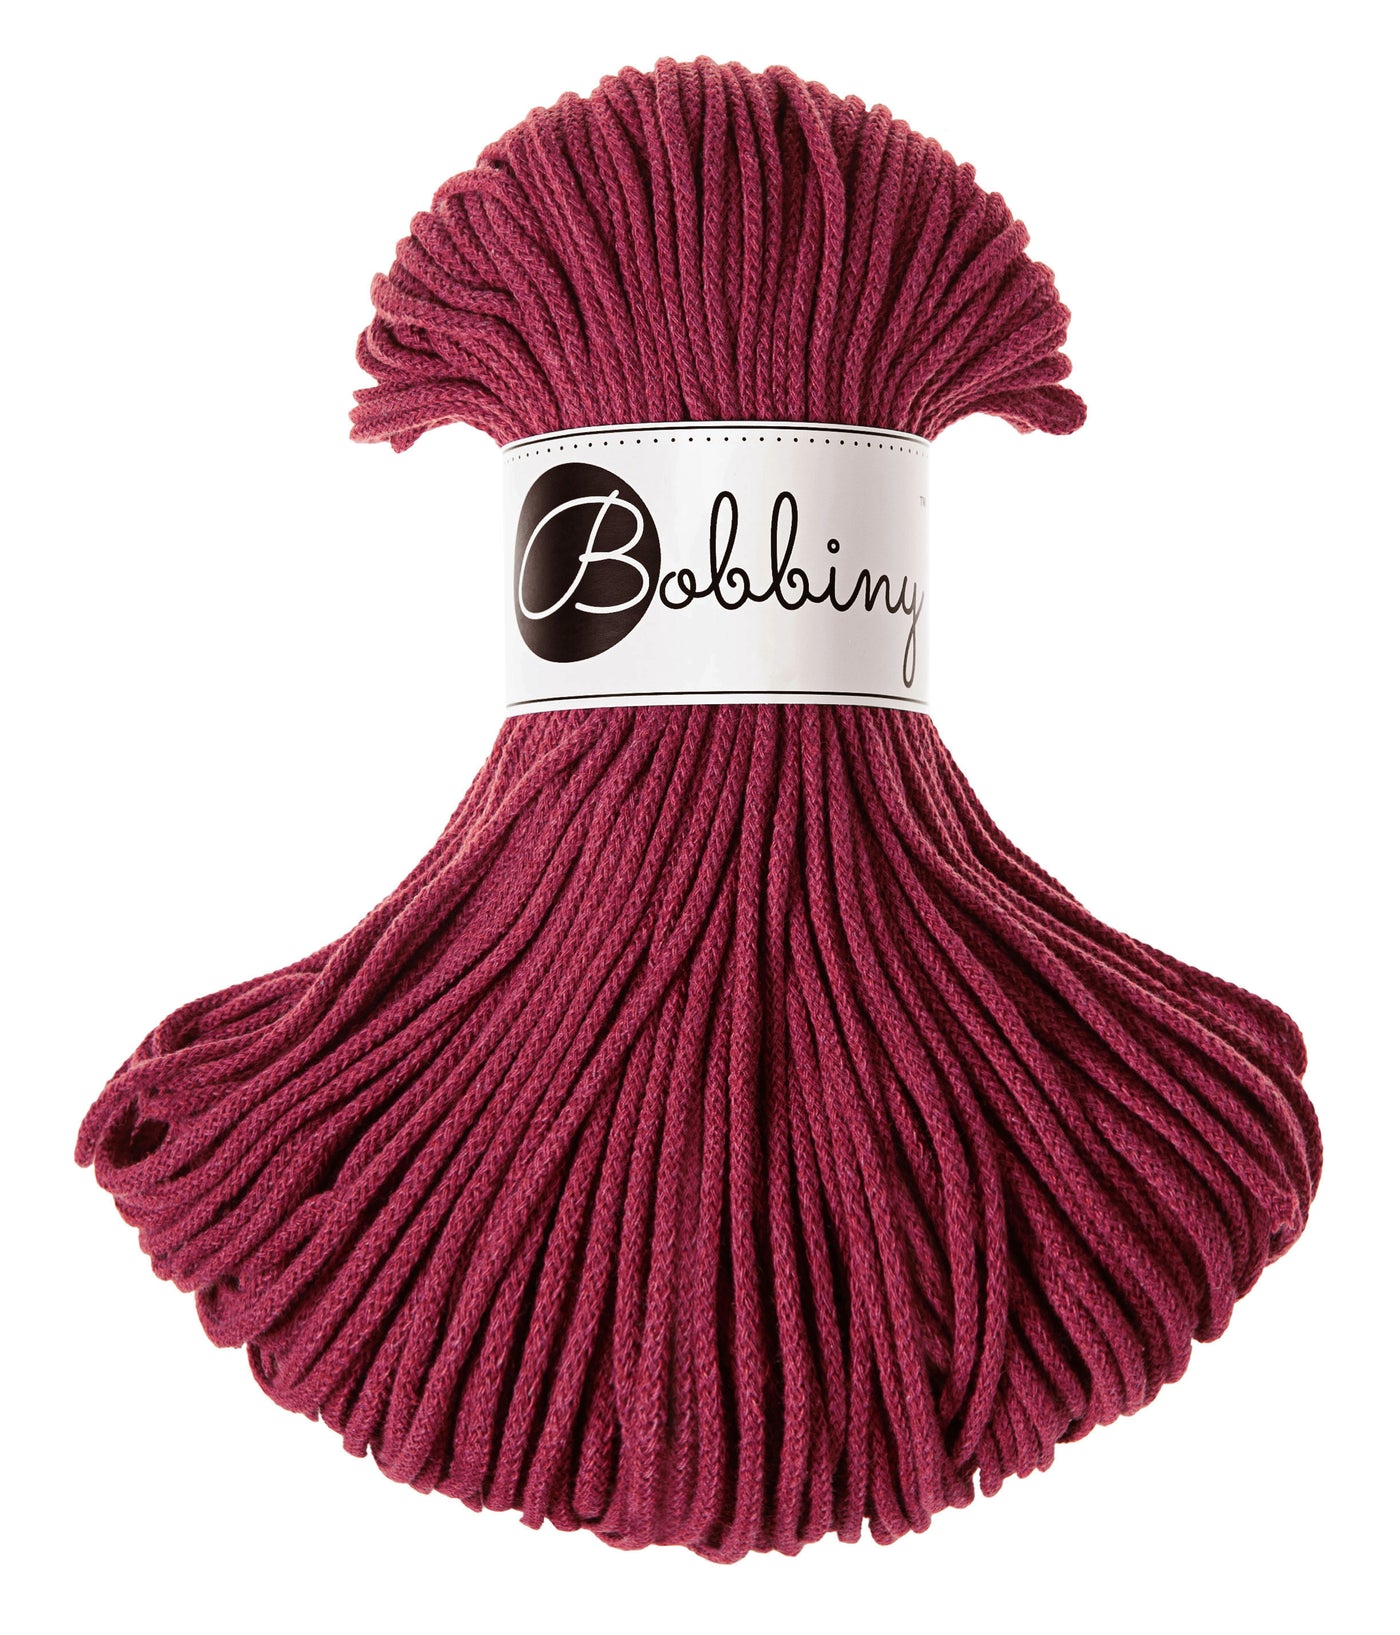 Braided cord in Wine Red shade